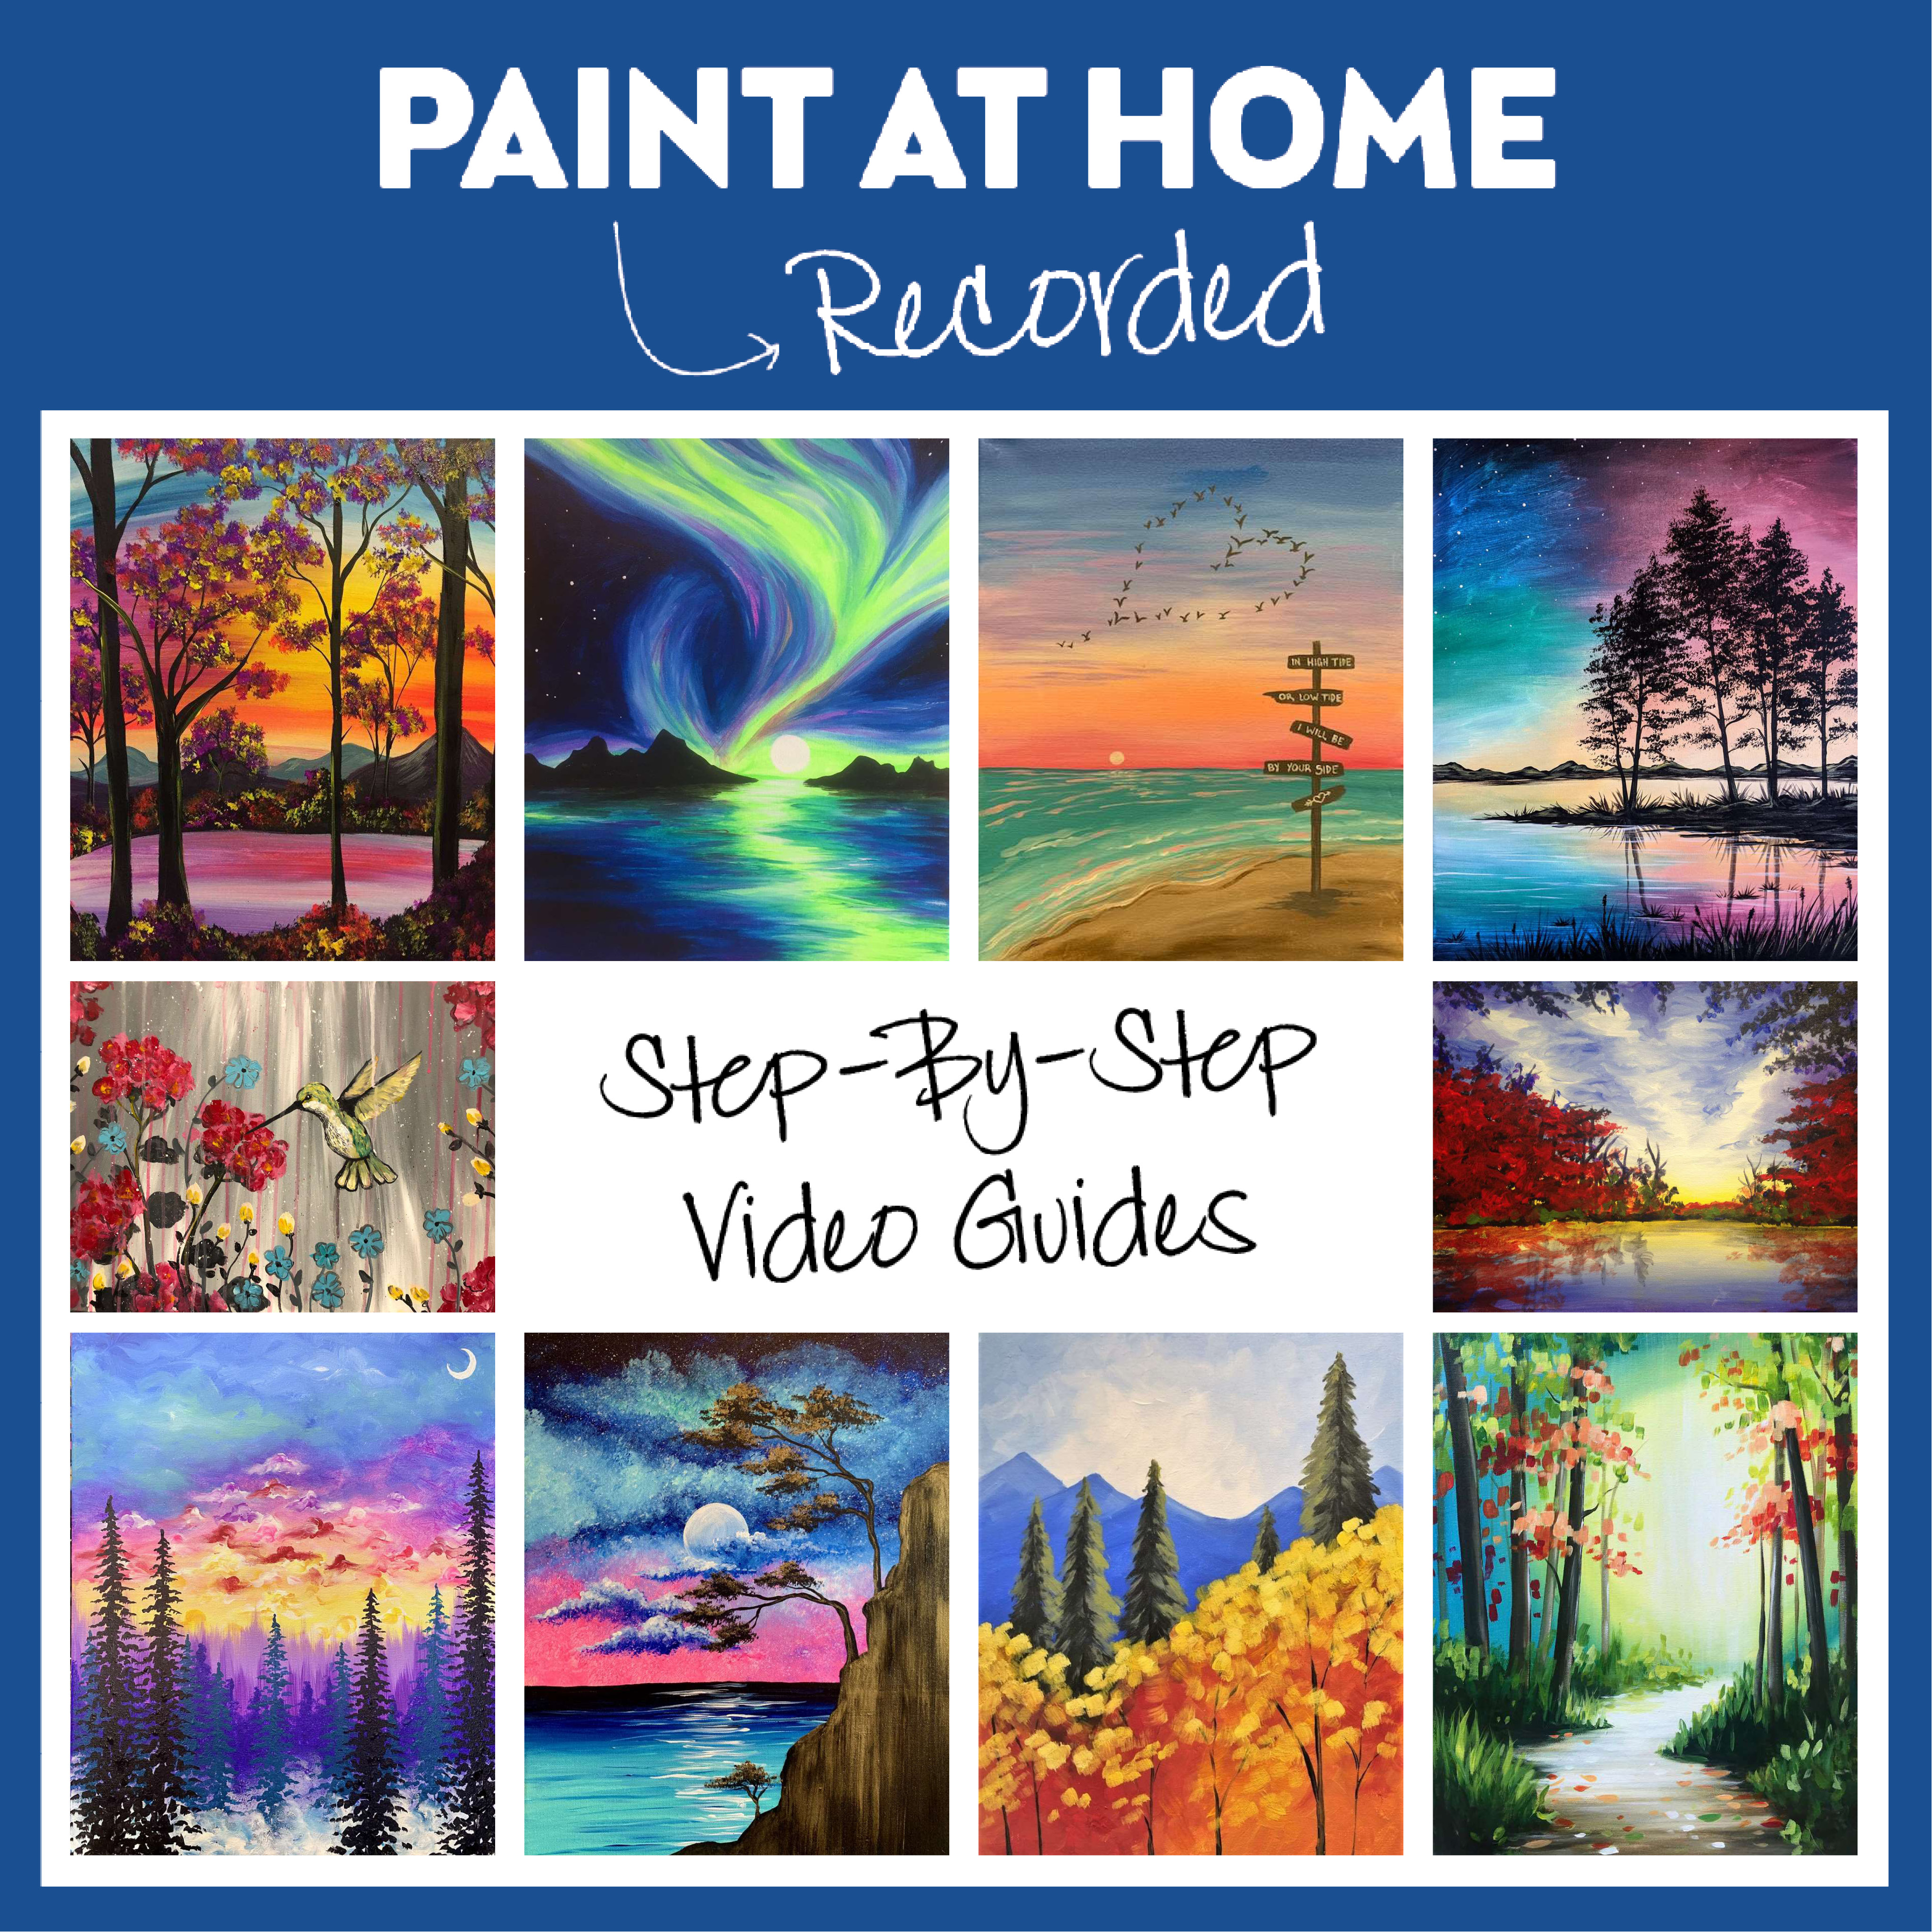 Paint at Home - 100s of choices - Video Included use code "June" for $5 off